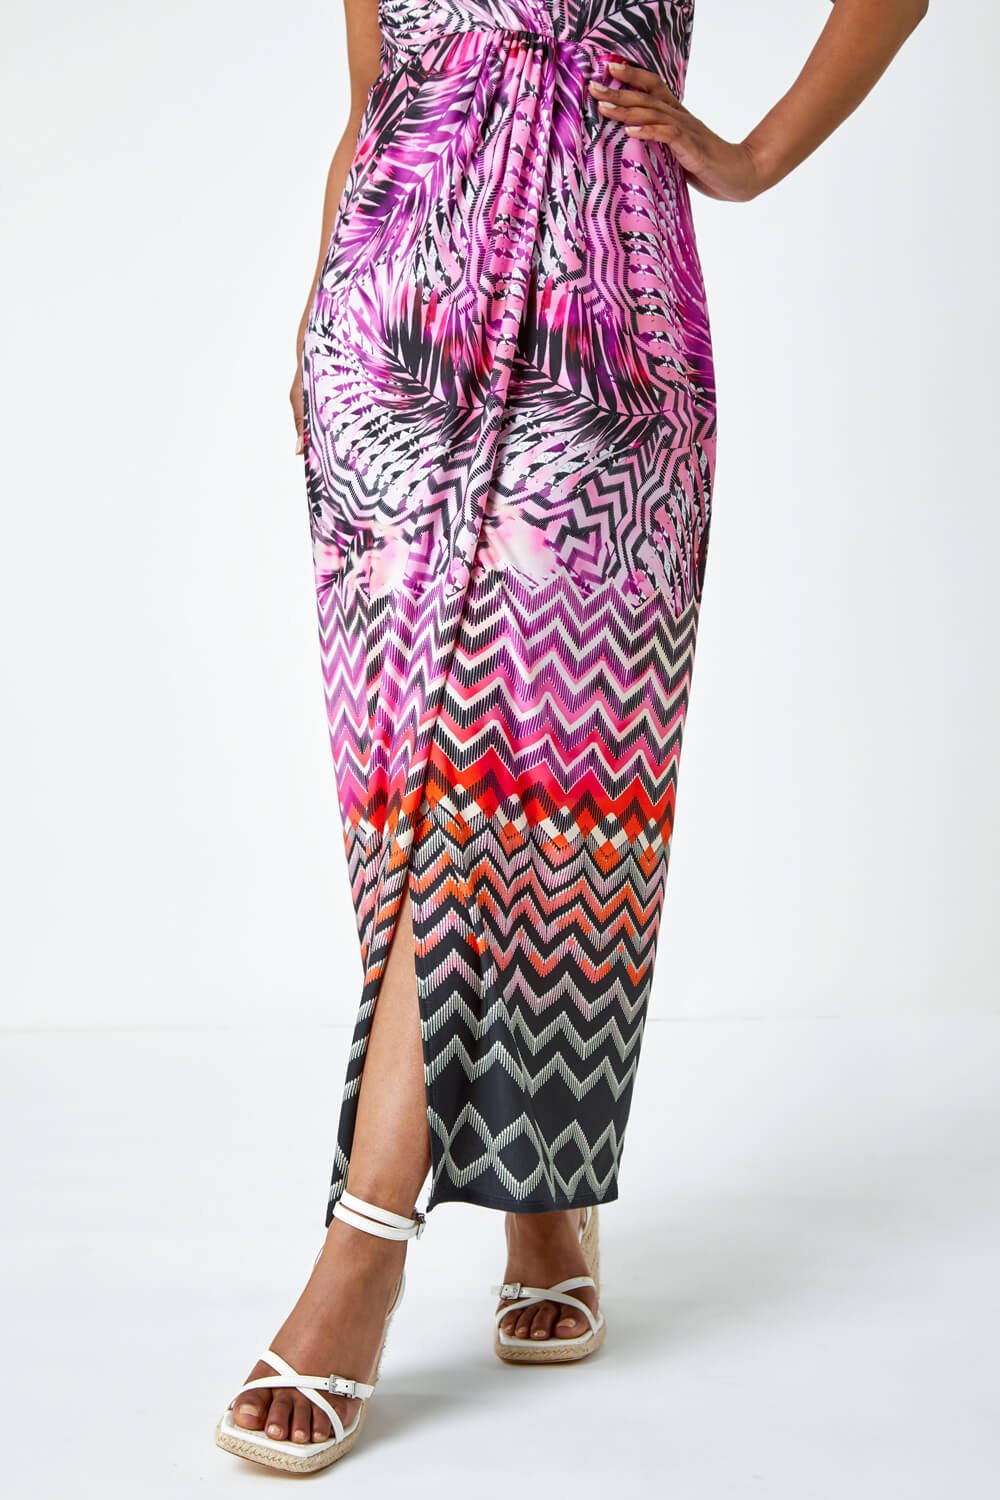 PINK Petite Abstract Print Ruched Wrap Maxi Dress, Image 5 of 5